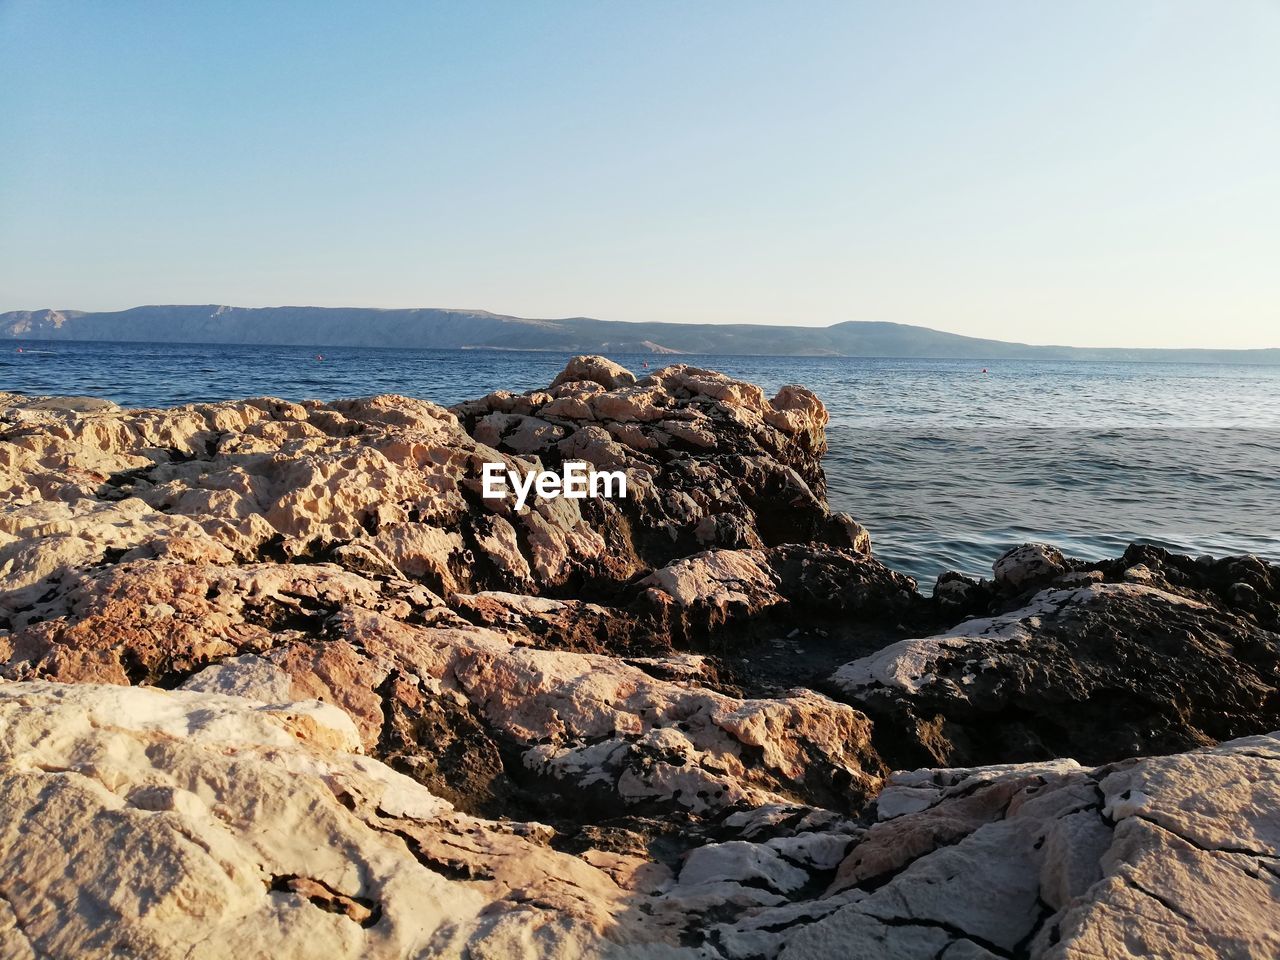 SCENIC VIEW OF ROCKY BEACH AGAINST CLEAR SKY